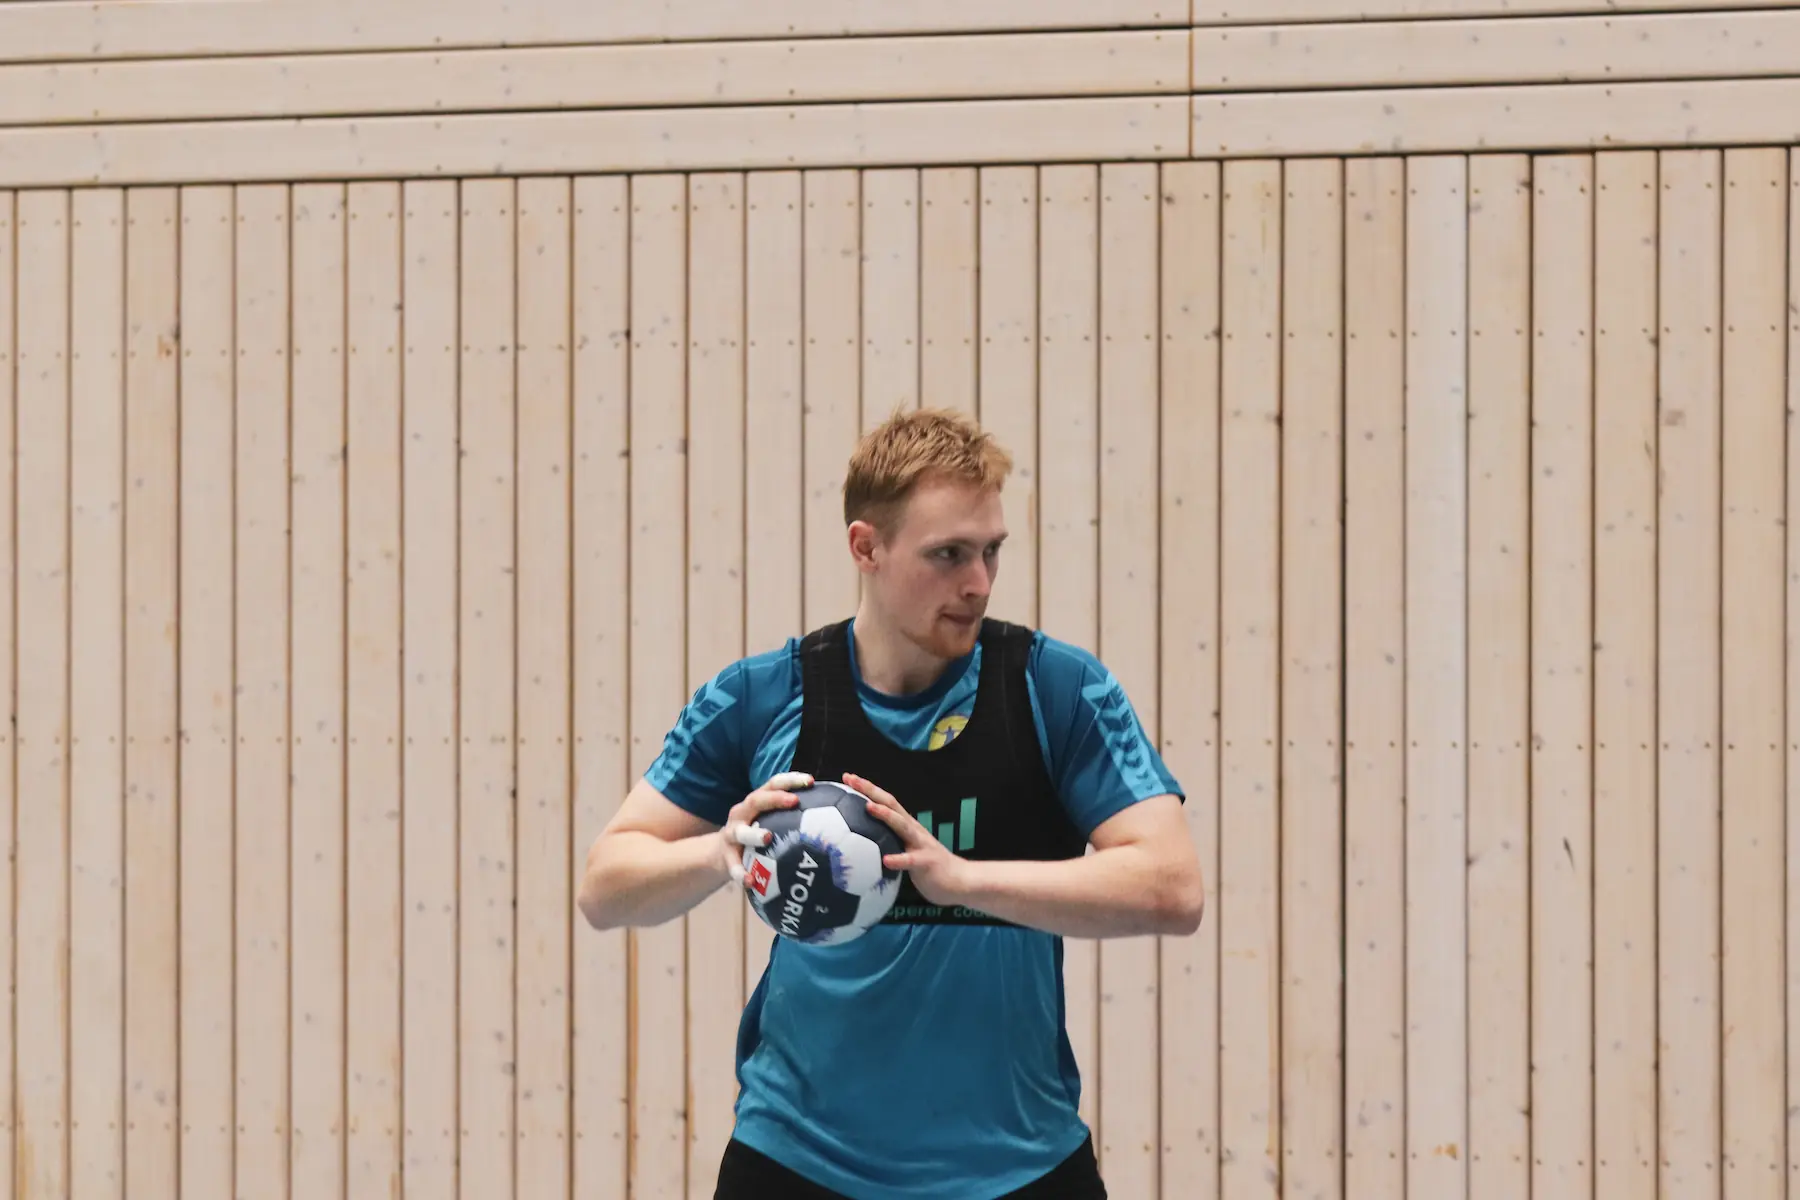 Handball player holding a ball while training with the Coachwhisperer Soundstar